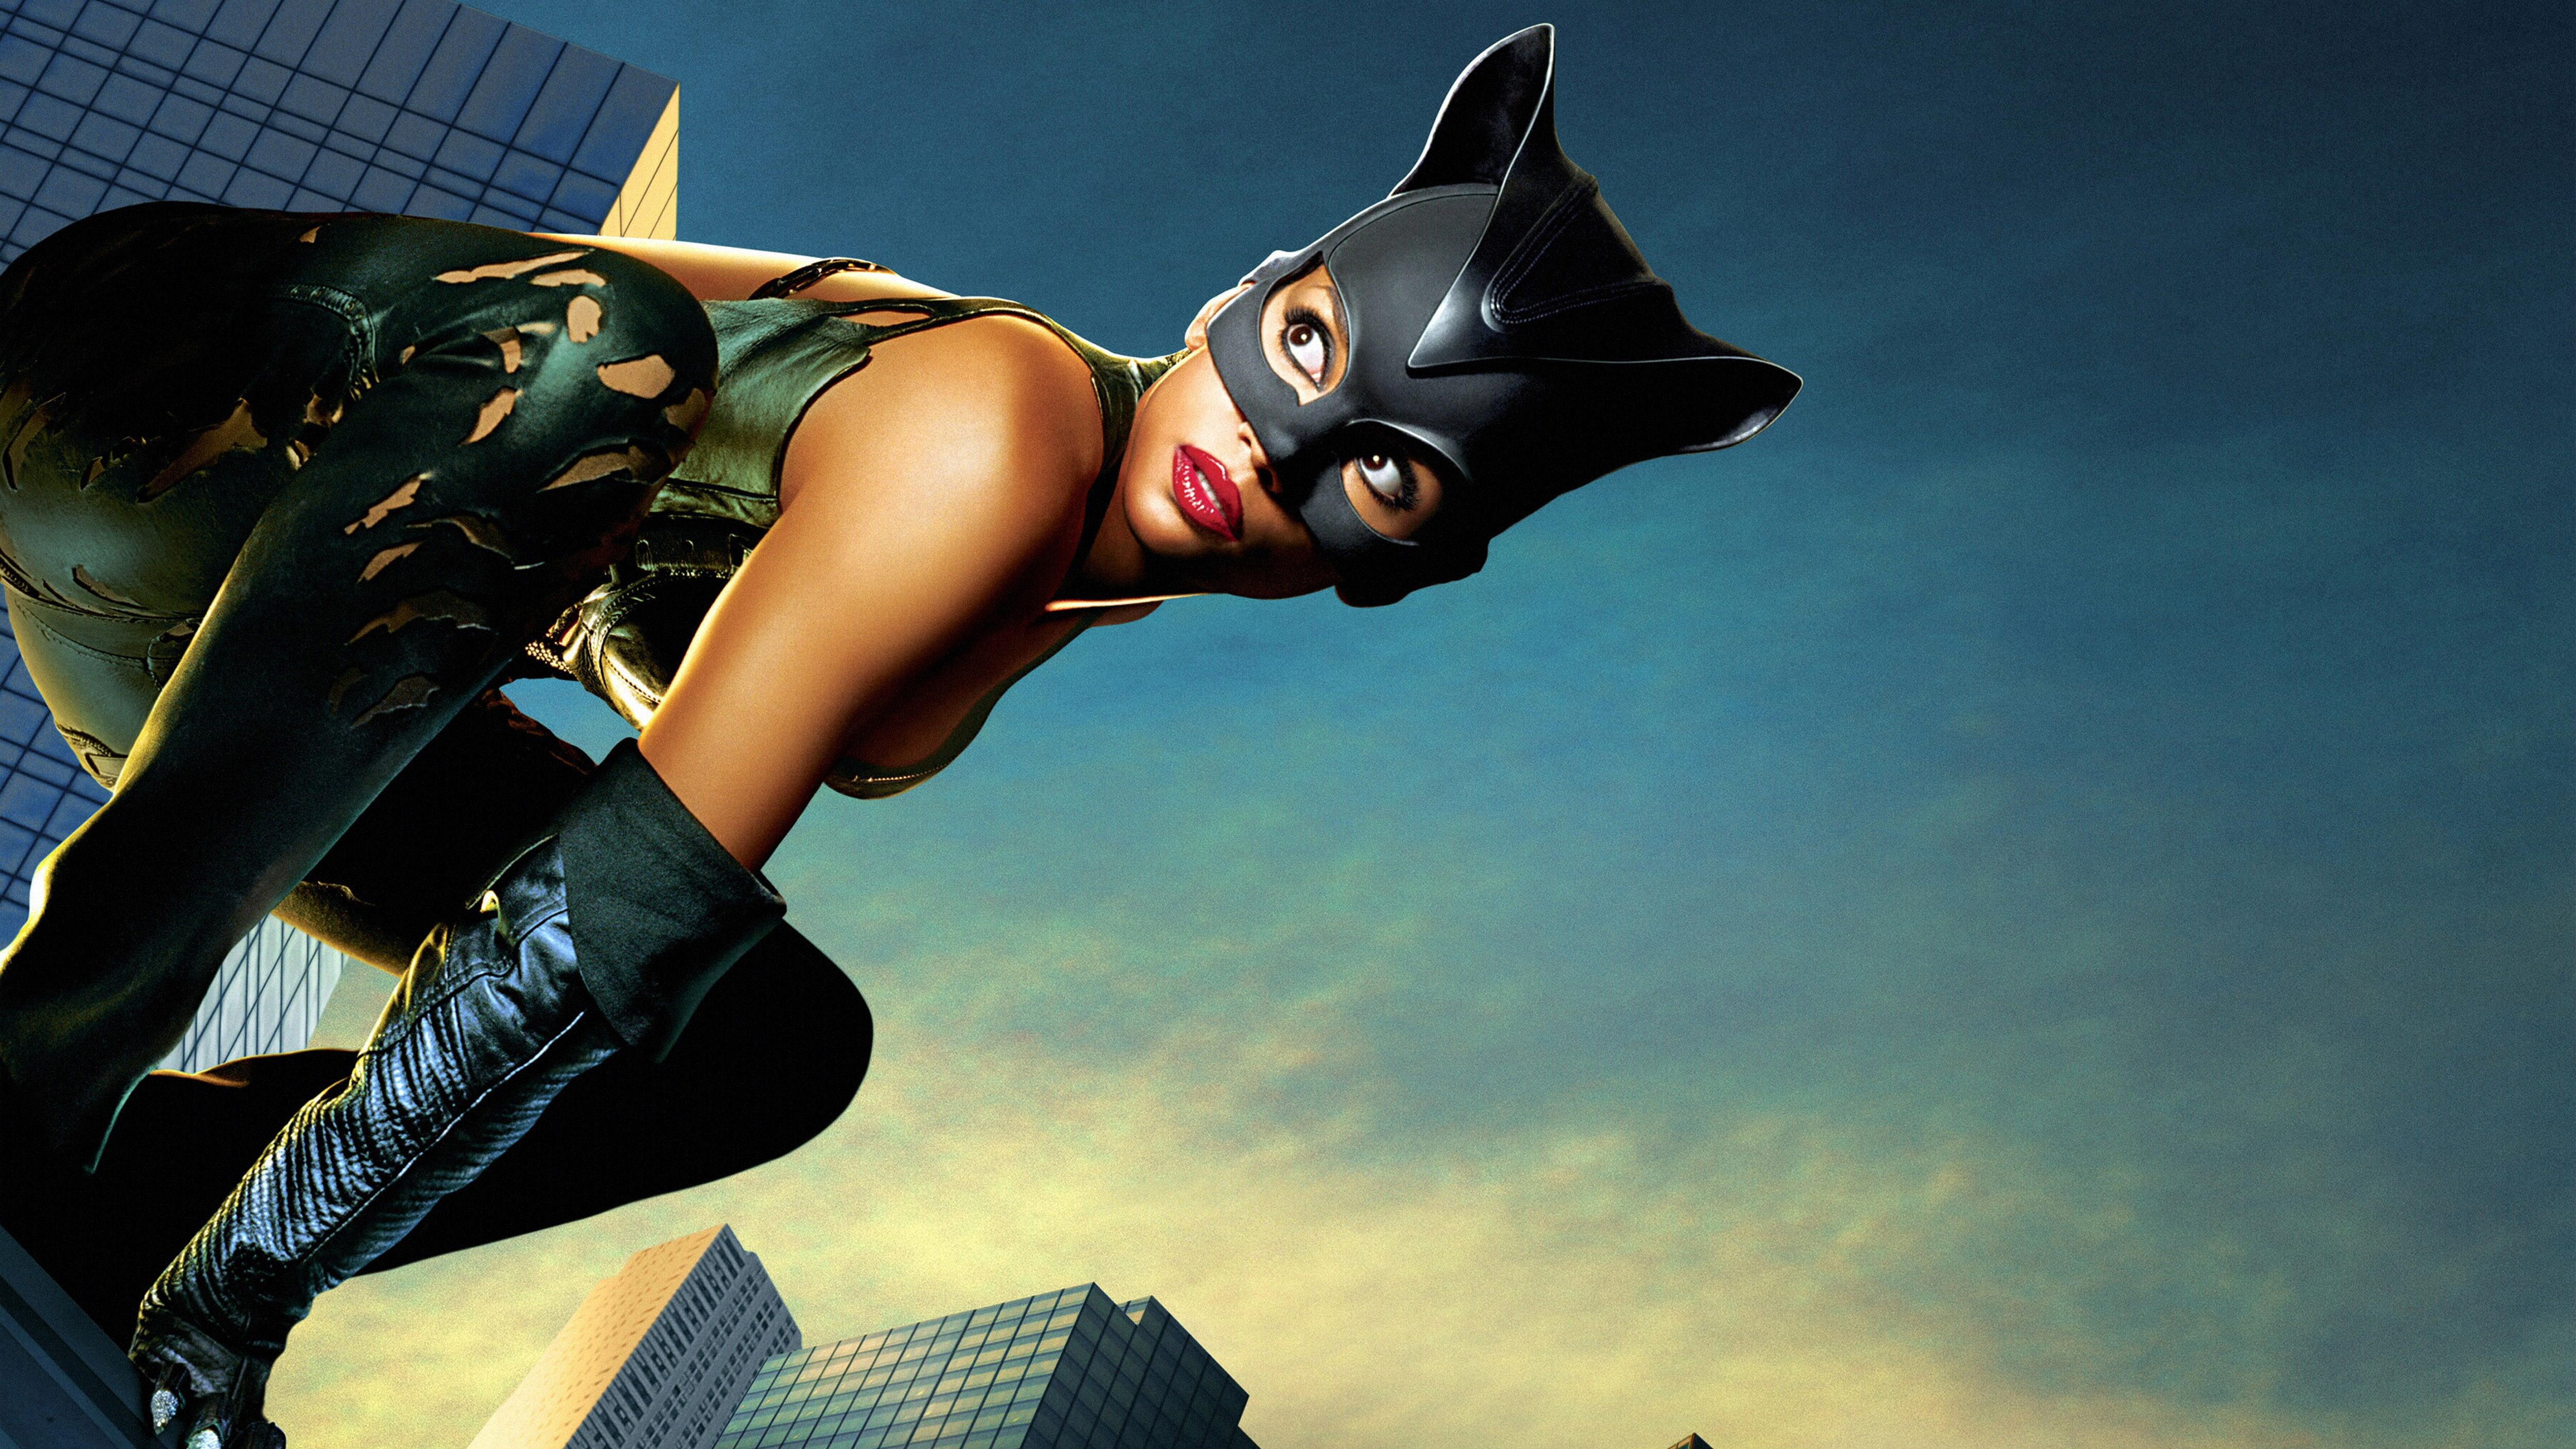 Wallpaper Catwoman, Halle Berry, 4K, Movies / Most Popular,. Wallpaper for iPhone, Android, Mobile and Desktop